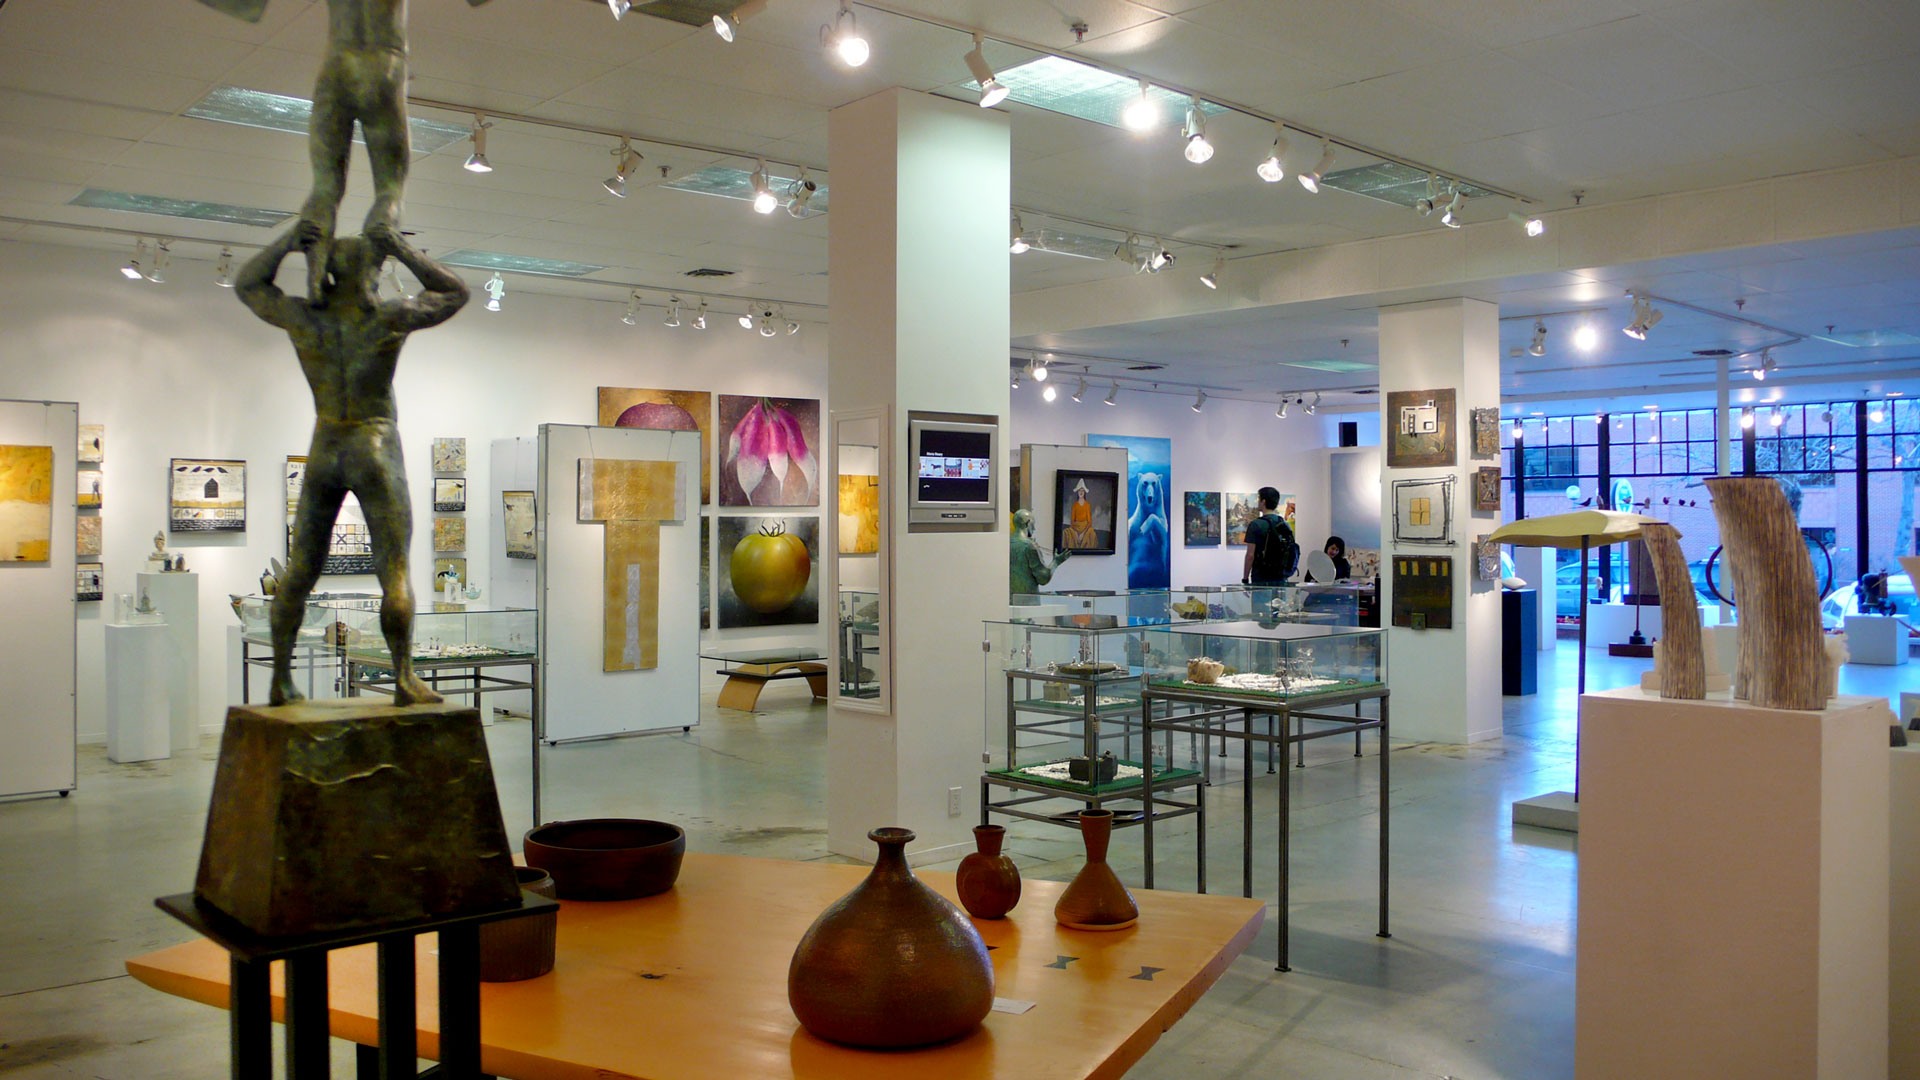 Blink Gallery designed by Hower Architects in Boulder, Colorado